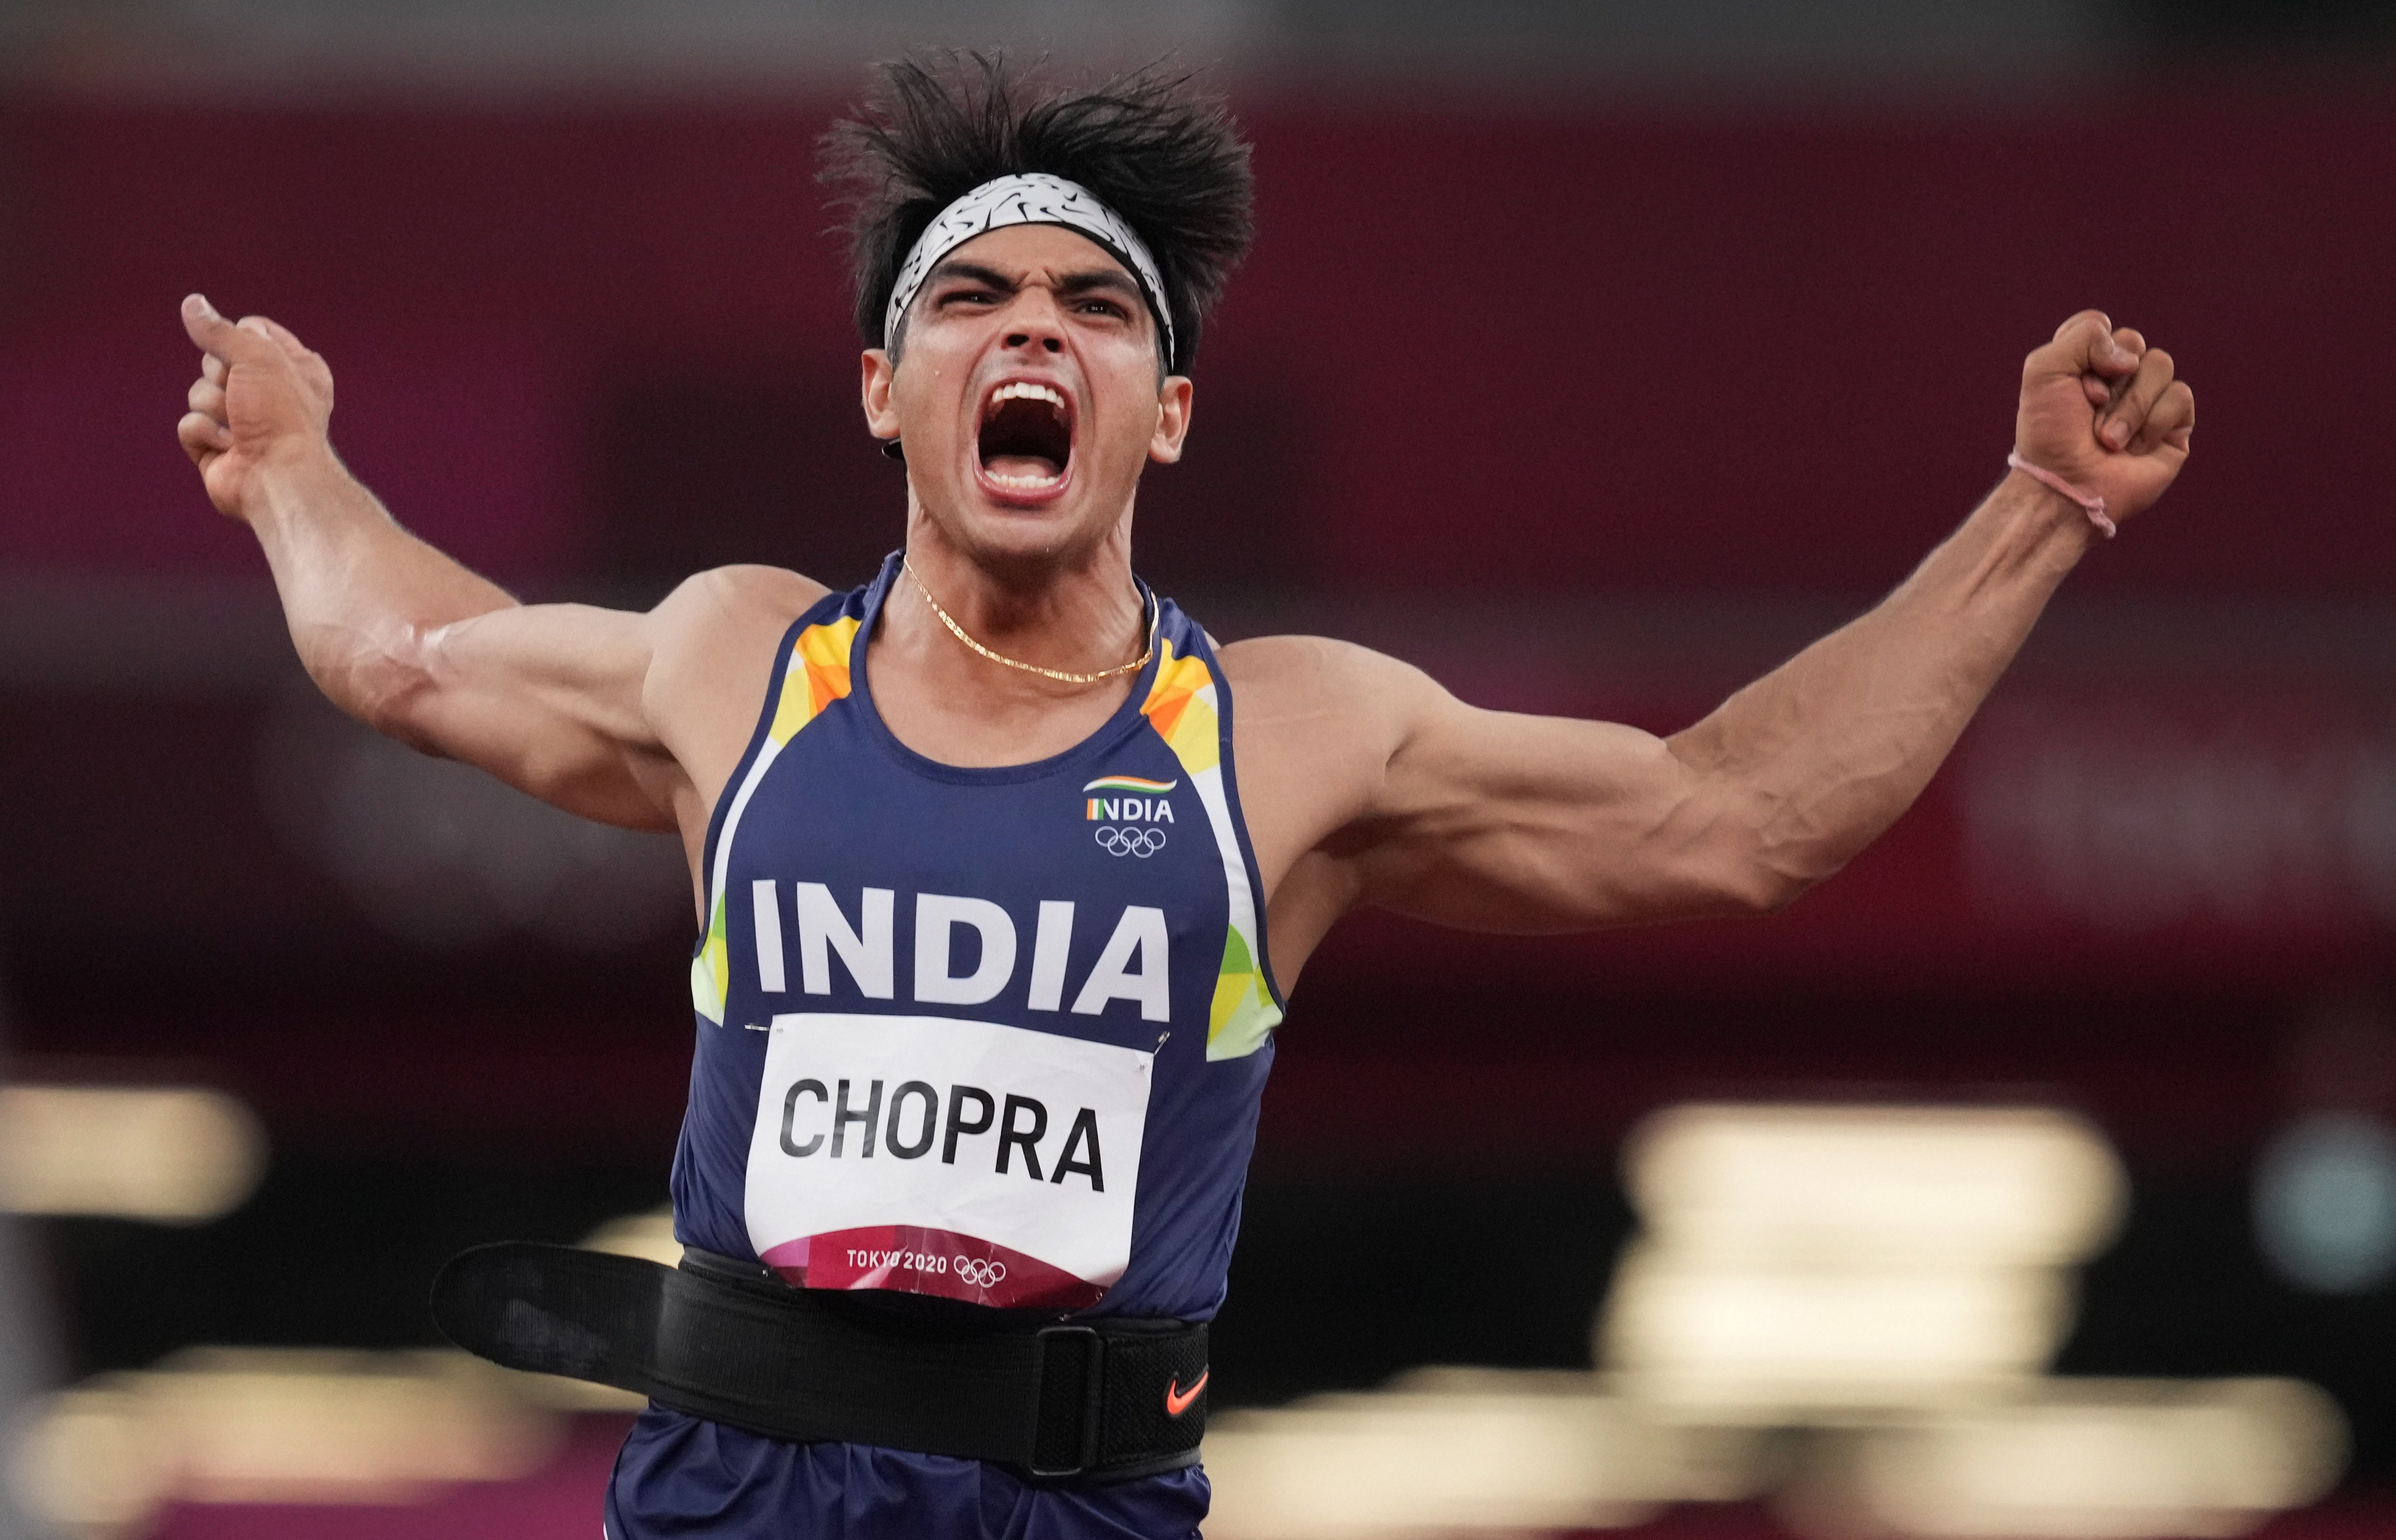 I am in happy place at the moment, says Olympic champion Chopra after stunning return to action